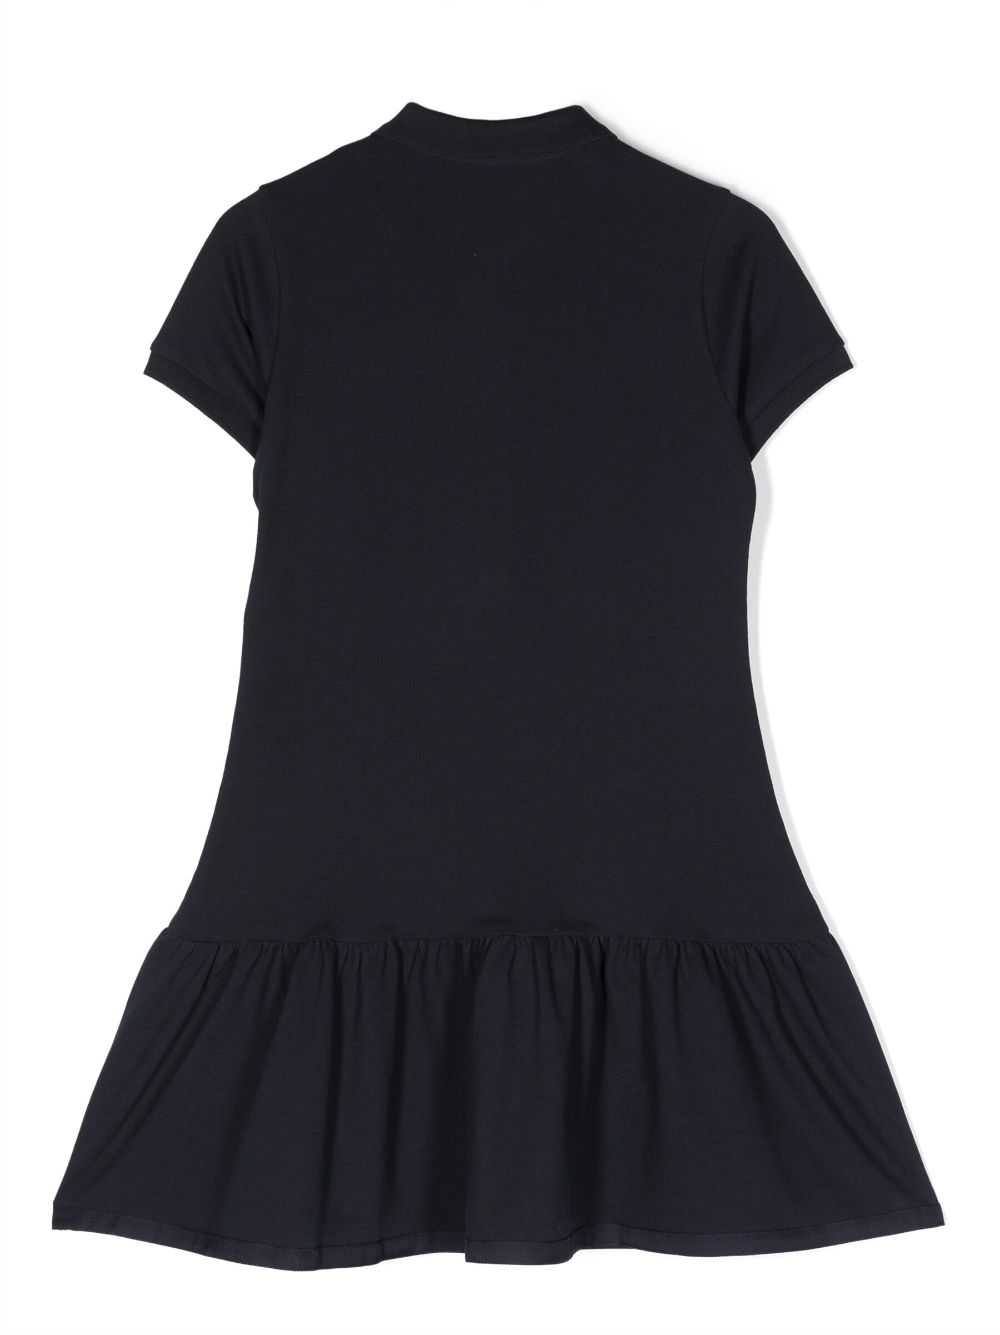 Navy blue dress for girls with logo